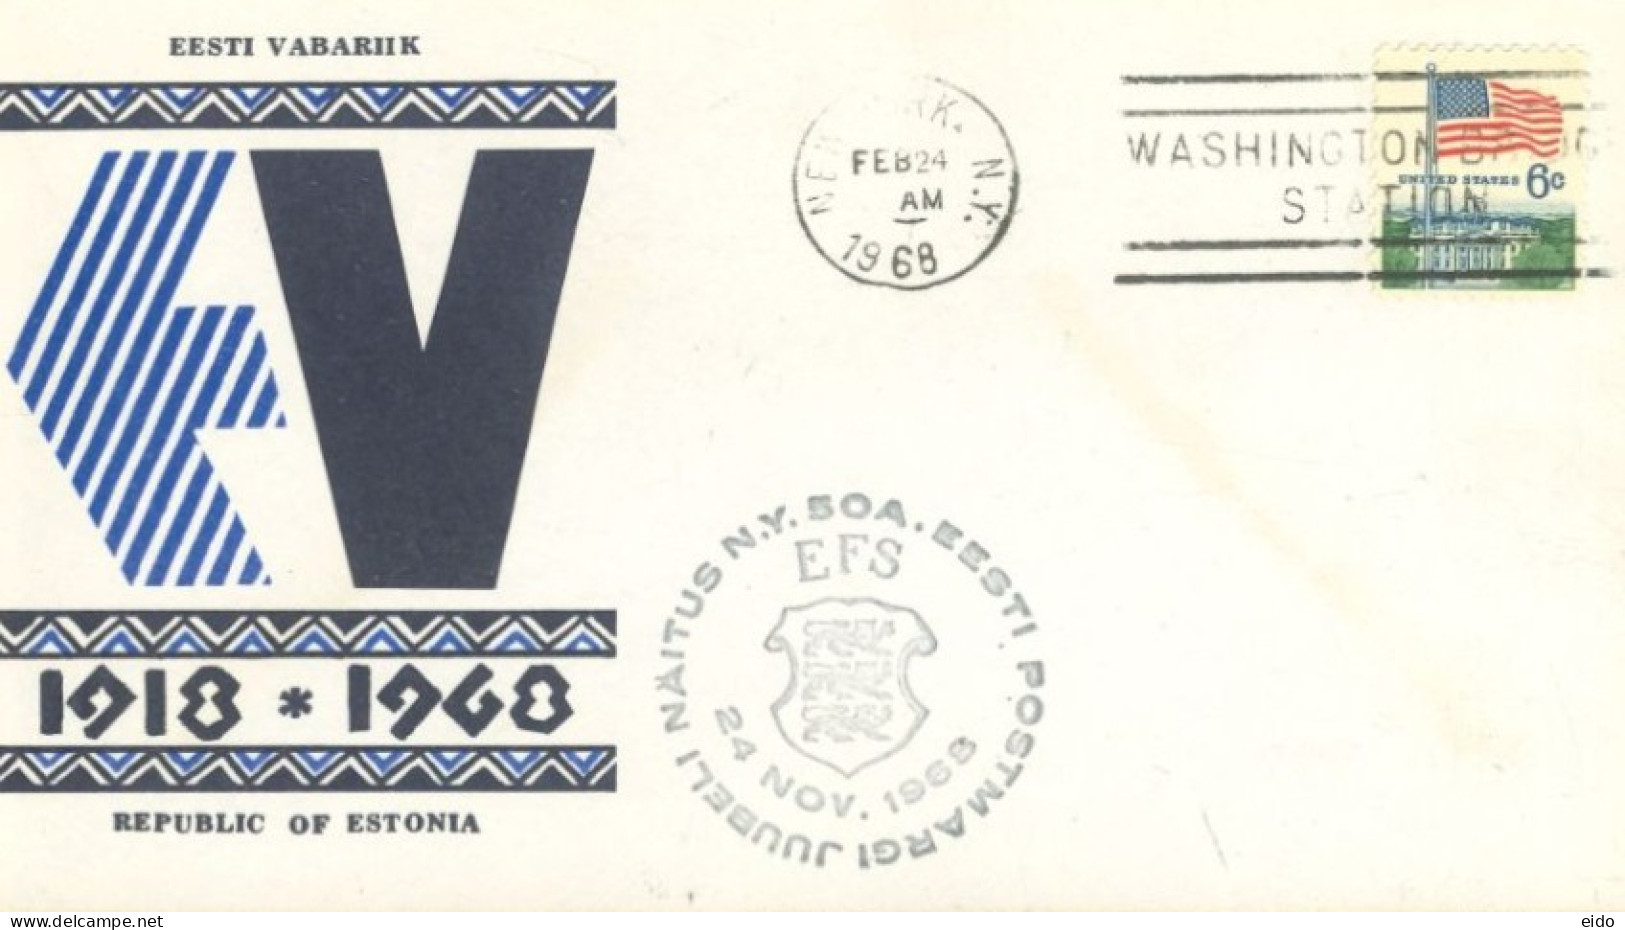 U.S.A.. -1968 -  OFFICIAL STAMP COVER OF 50th ANNIVERSARY OF REPUBLIC OF ASTONIA. - Briefe U. Dokumente